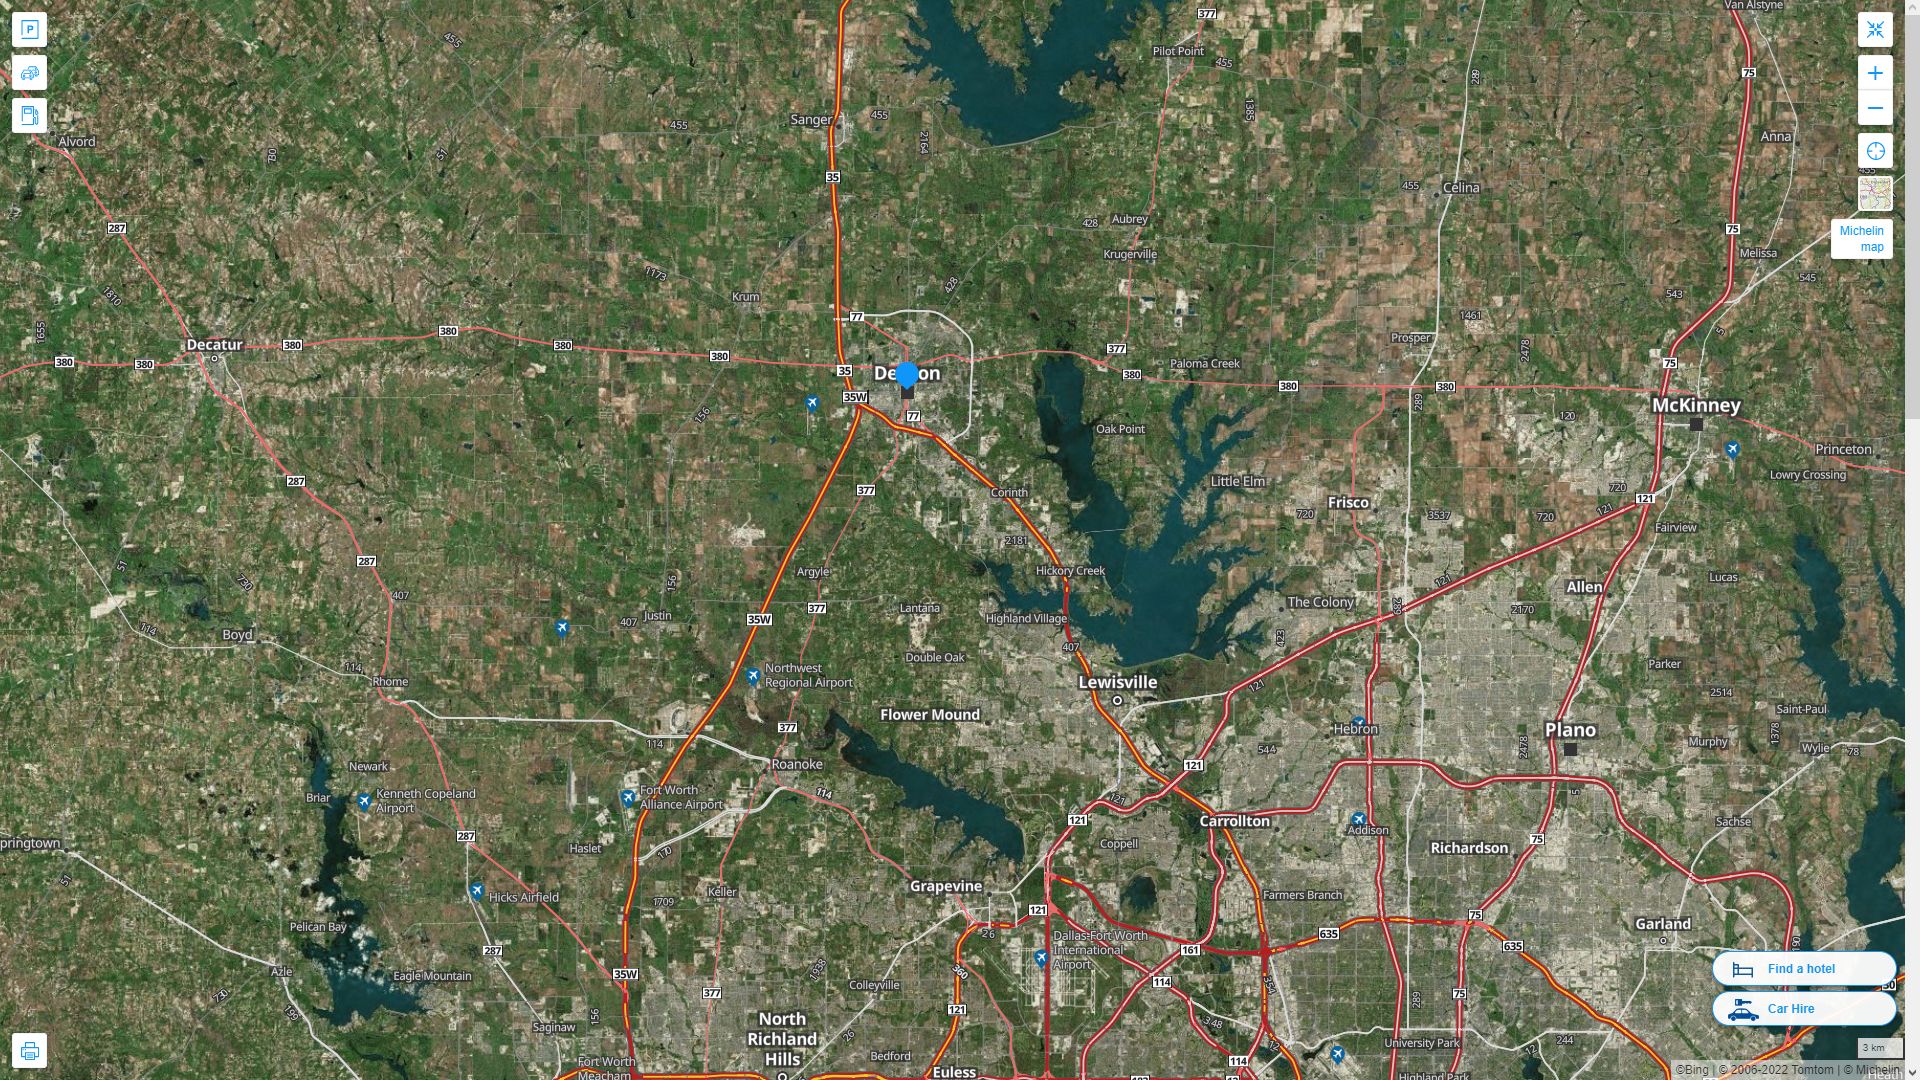 Denton Texas Highway and Road Map with Satellite View